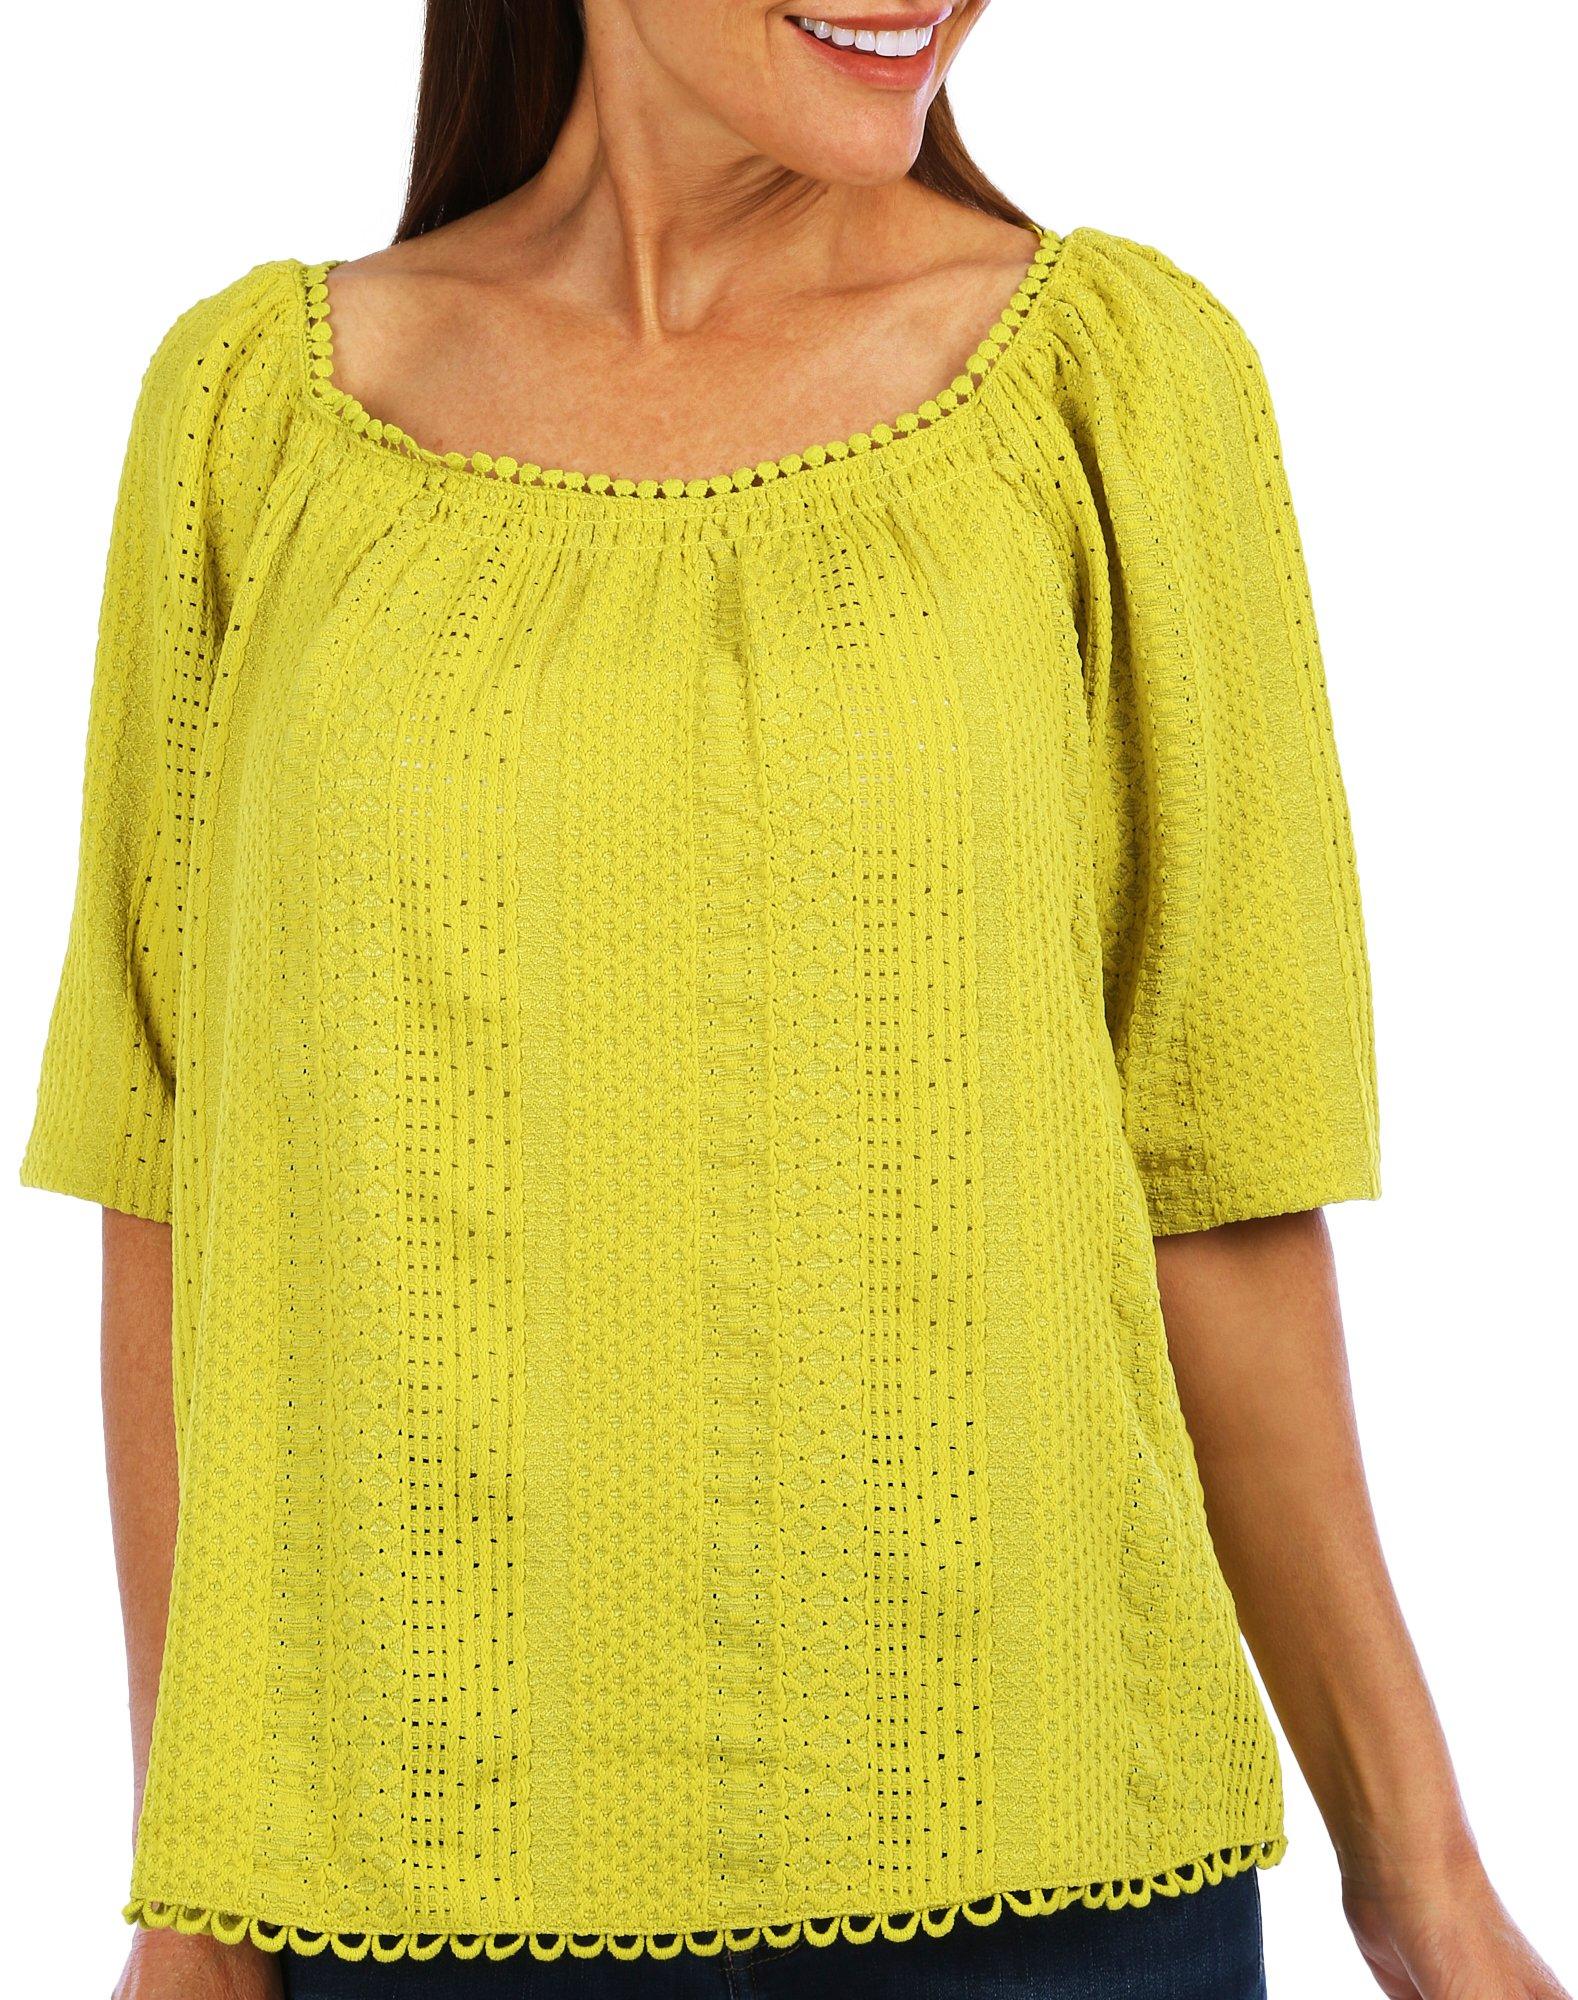 Women's Solid Eyelet Knit Top